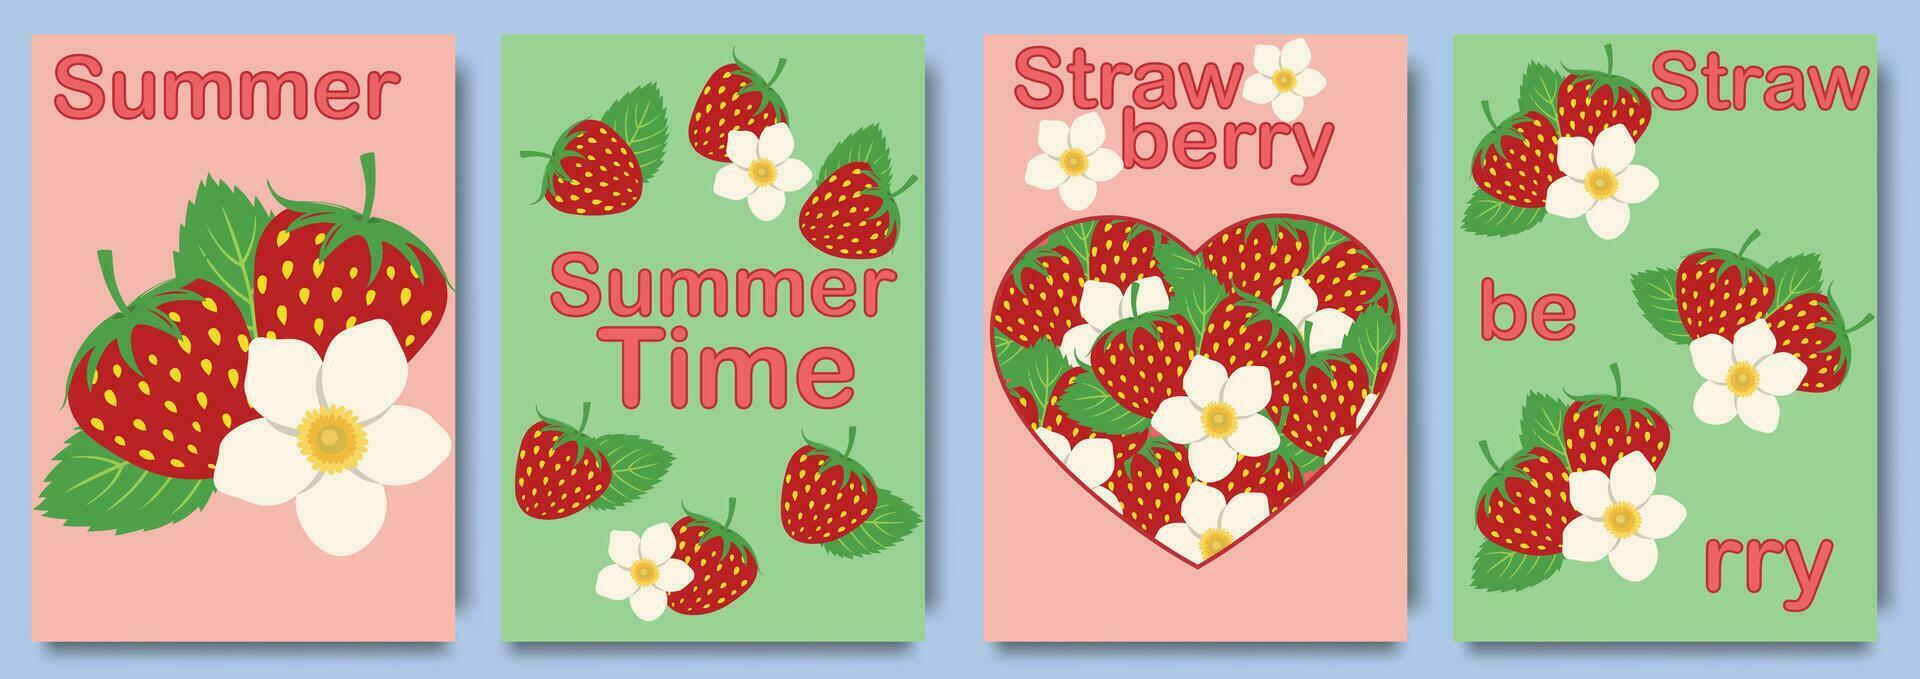 Creative summer concept with strawberry. Modern art design with hearts, strawberries, flowers and modern typography. Templates for celebration, ads, branding, banner, cover, label, poster vector